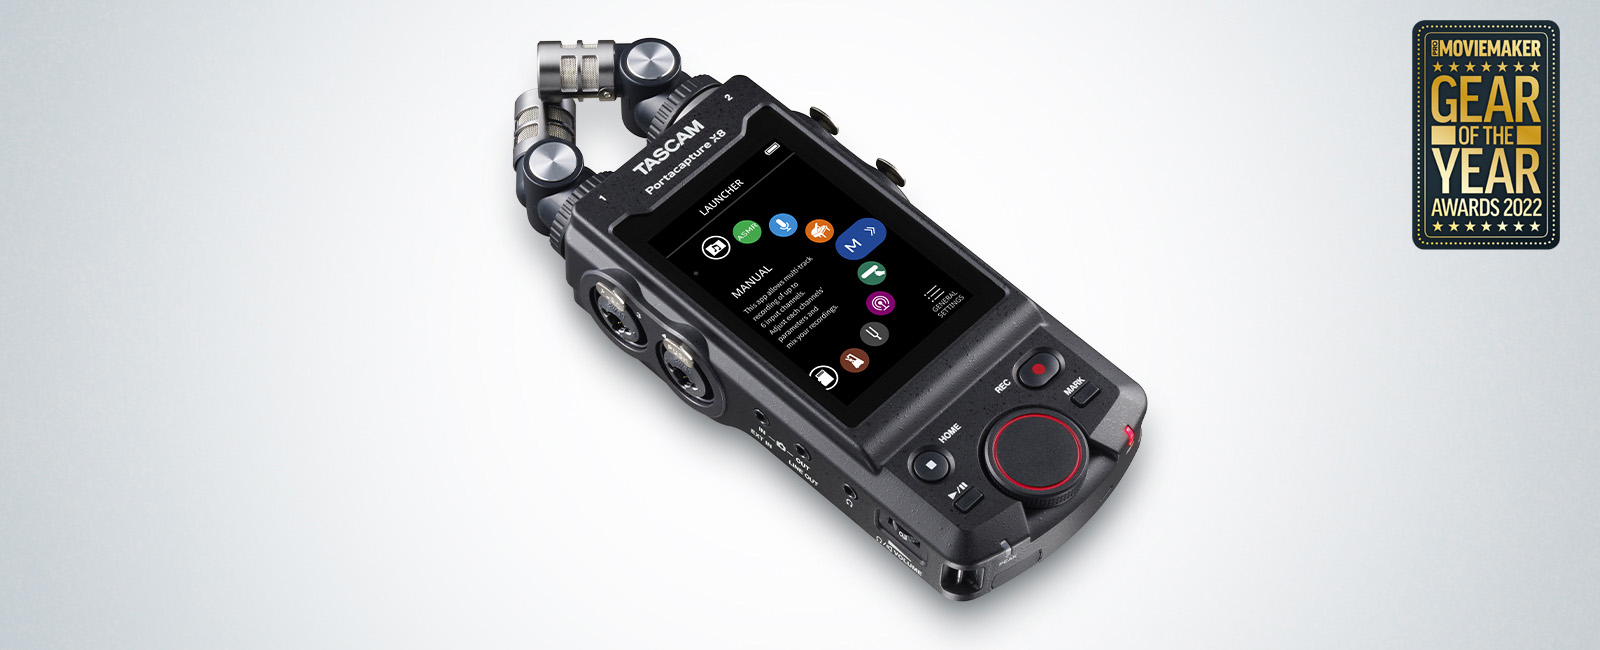 TASCAM Portacapture X8 Receives Pro Moviemaker's Gear of the Year Award